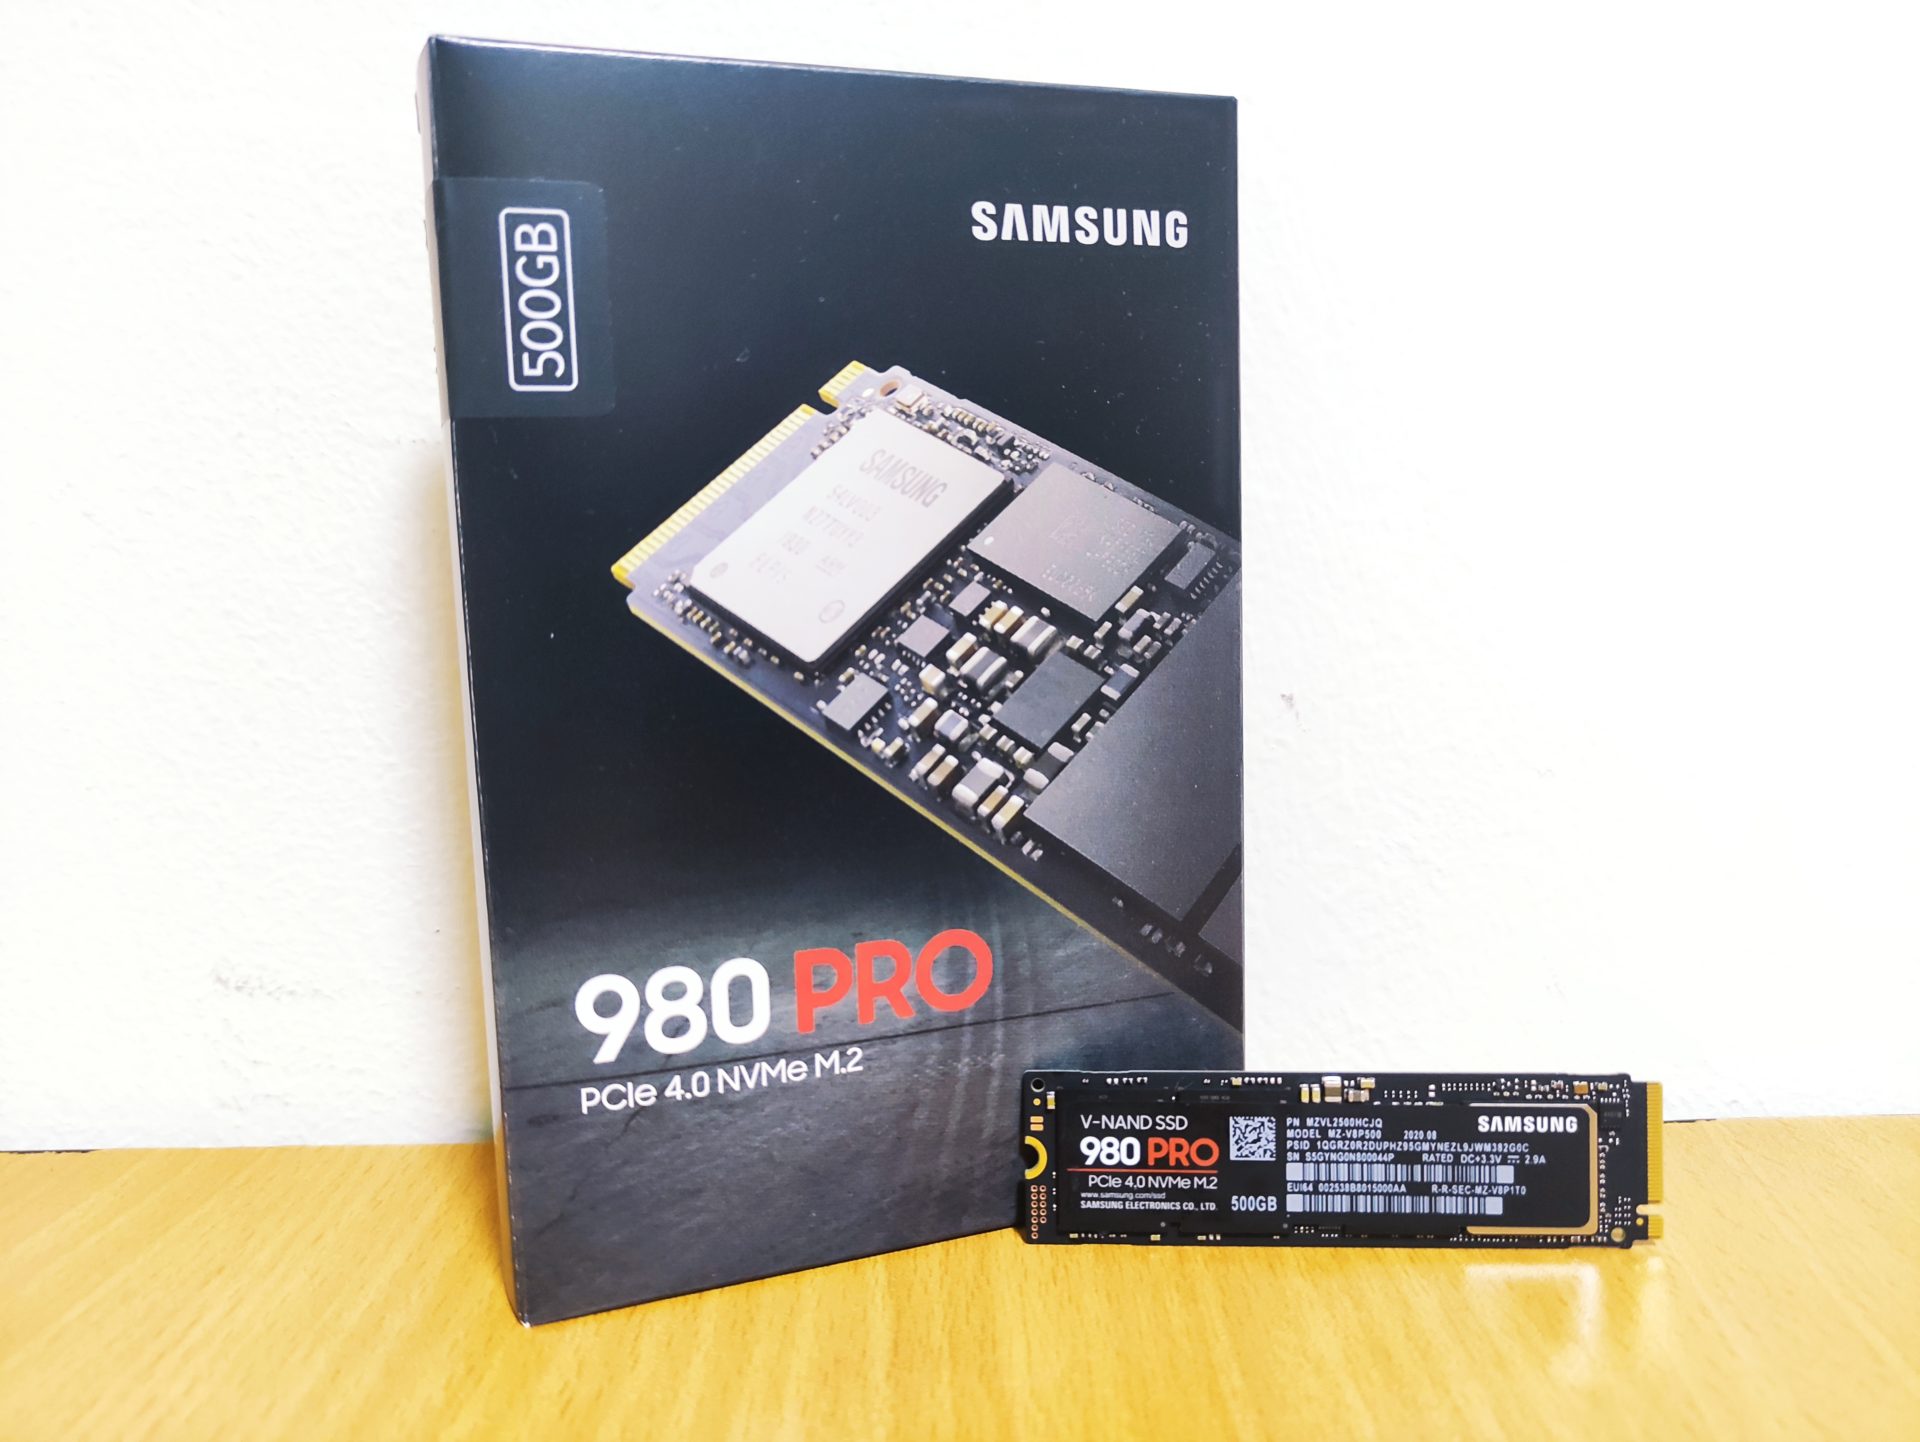 Samsung 980 PRO 500GB PCIe 4.0 SSD Review - Fast, but is it the fastest? -  The Tech Revolutionist